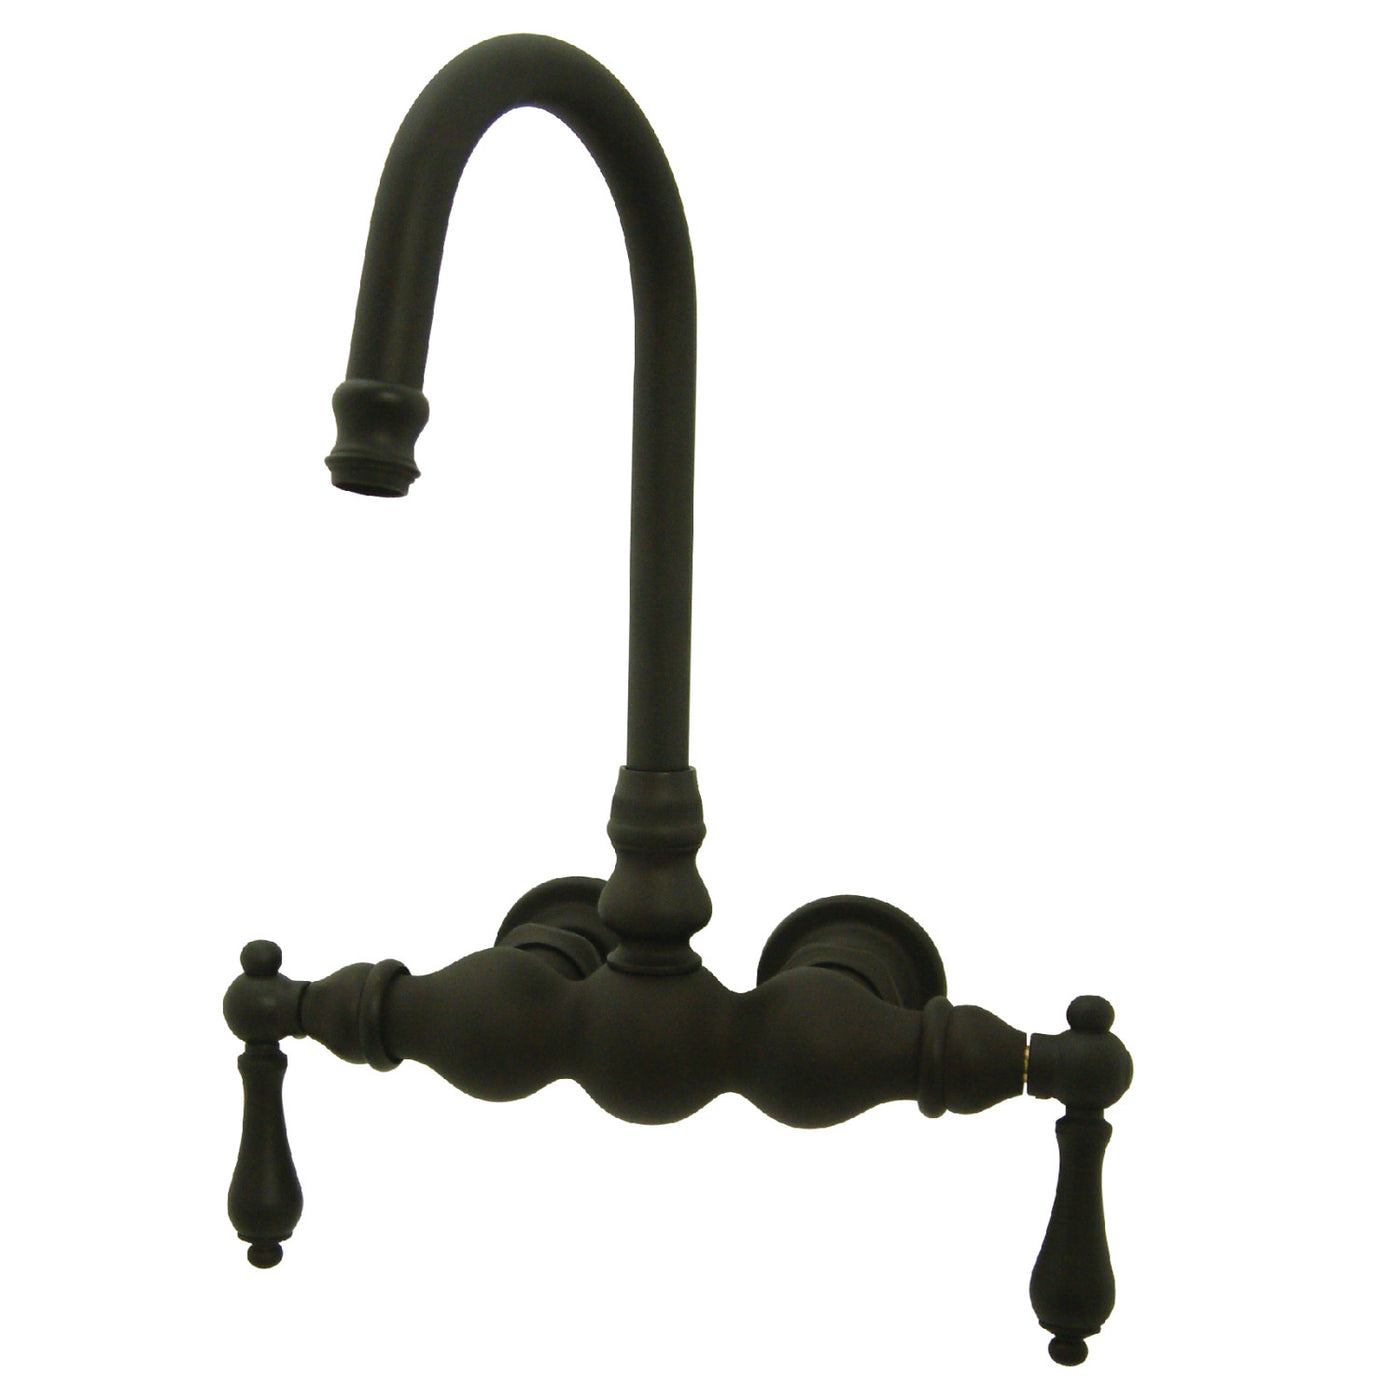 Elements of Design DT0015AL 3-3/8-Inch Wall Mount Tub Faucet, Oil Rubbed Bronze